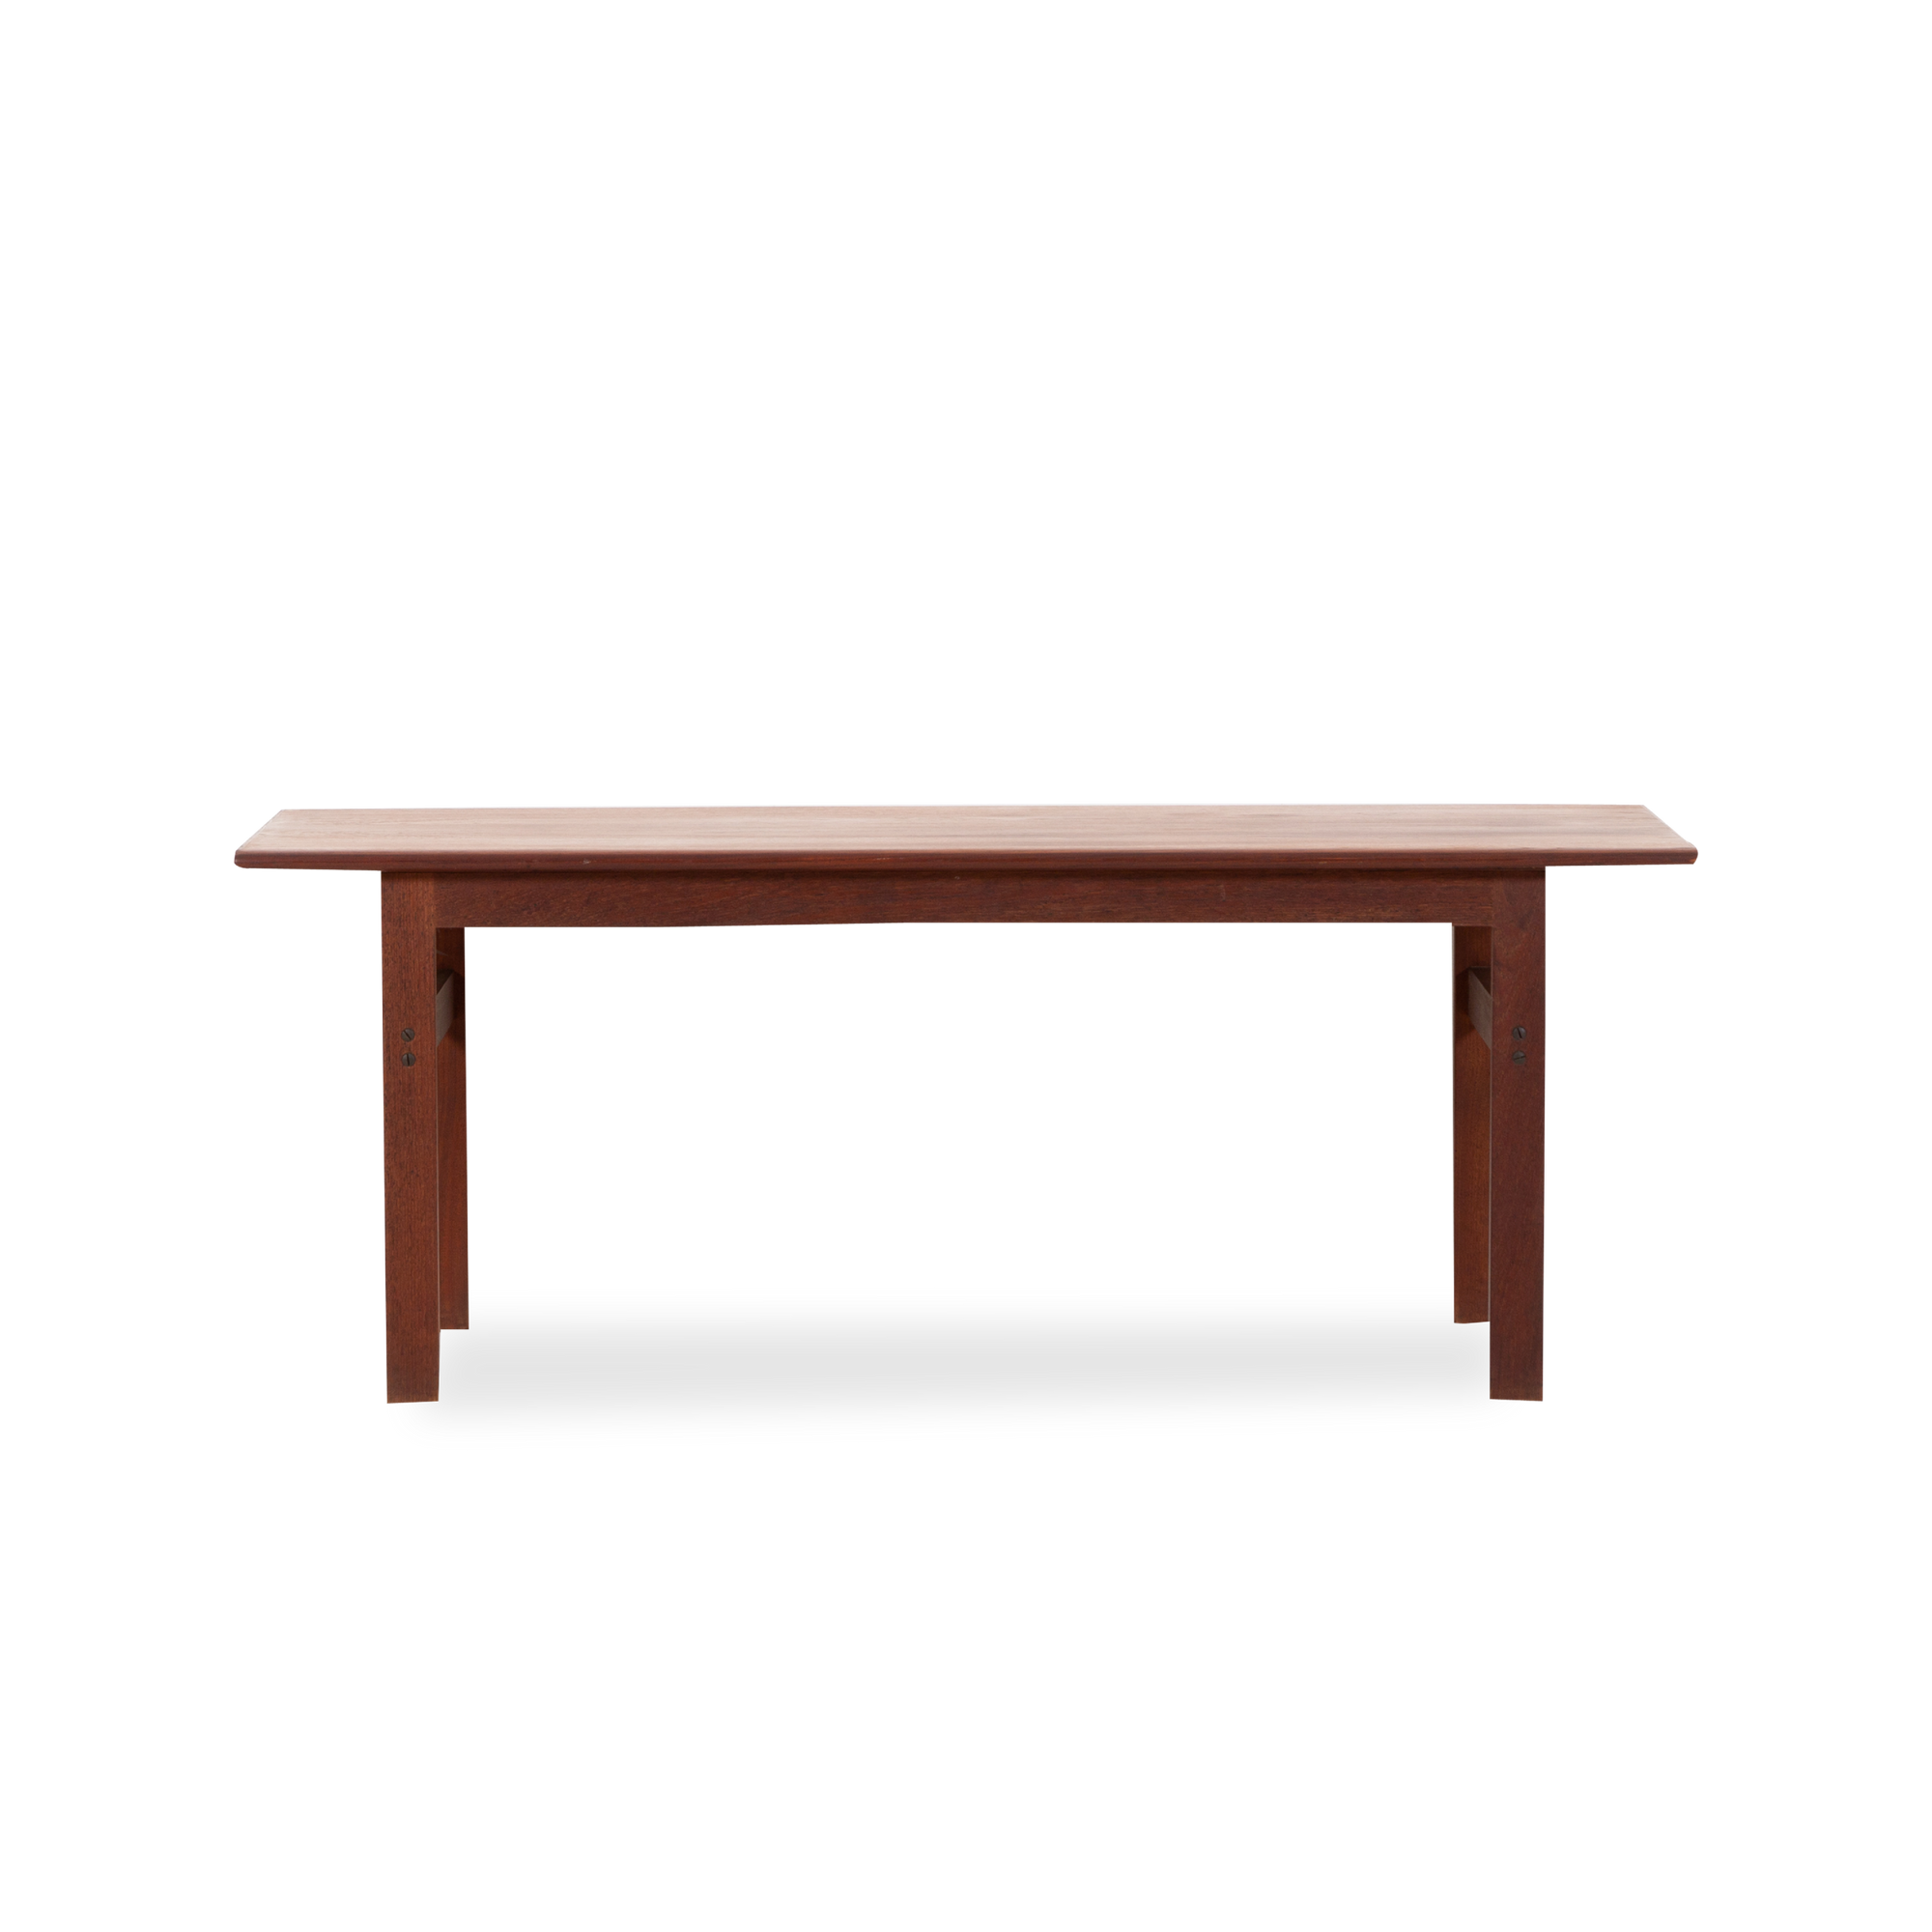 Displaying finely crafted details, this vintage coffee table was designed by Illum Wikkelso for Niels Eilersen, circa 1960s.